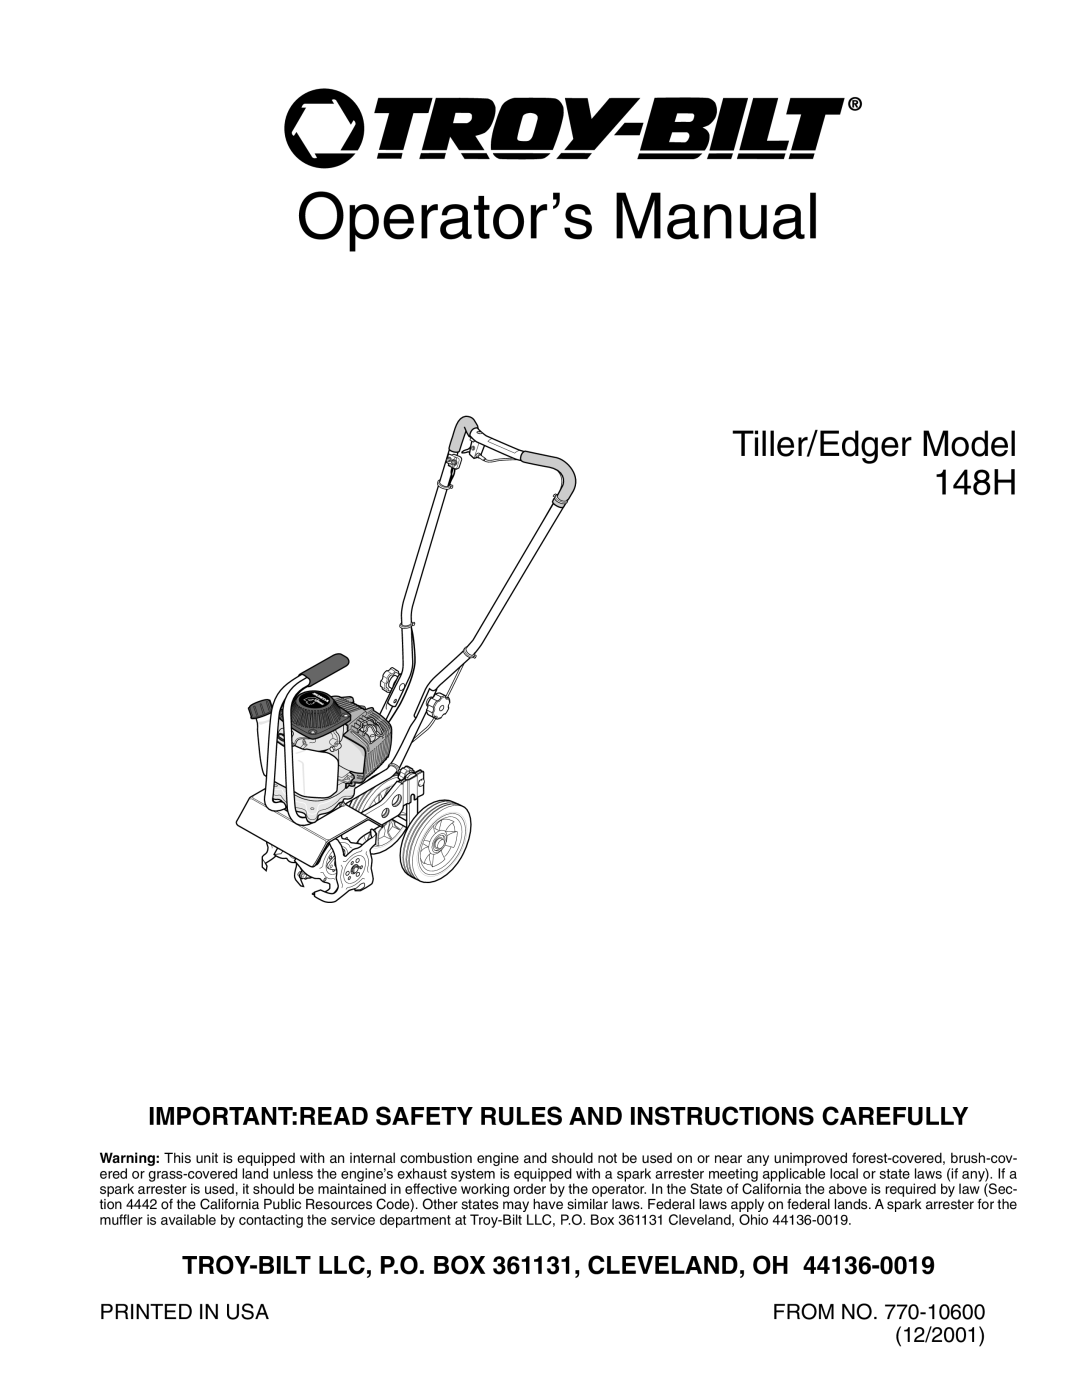 Troy-Bilt 148H manual Importantread Safety Rules And Instructions Carefully, TROY-BILT LLC, P.O. BOX 361131, CLEVELAND, OH 